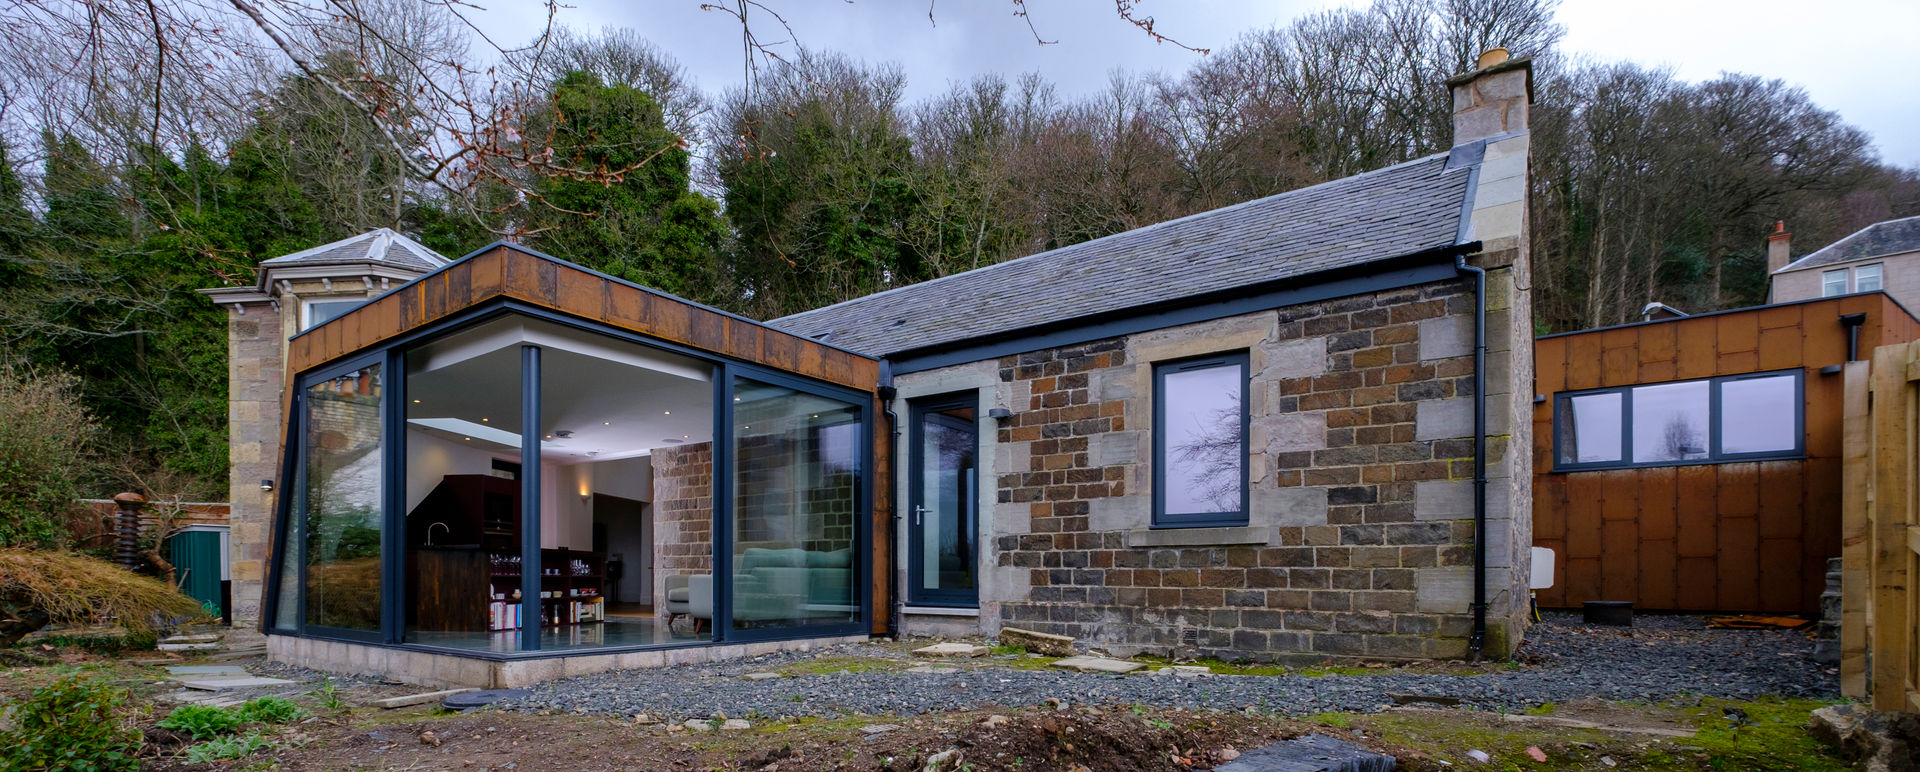 The rear extension to Woodend Cottage is clad in Corten steel and features large glass sliding doors Woodside Parker Kirk Architects Casas estilo moderno: ideas, arquitectura e imágenes Hierro/Acero Corten steel,cladding,cottage,extension,flat roof,alu-clad windows,daylight,garden